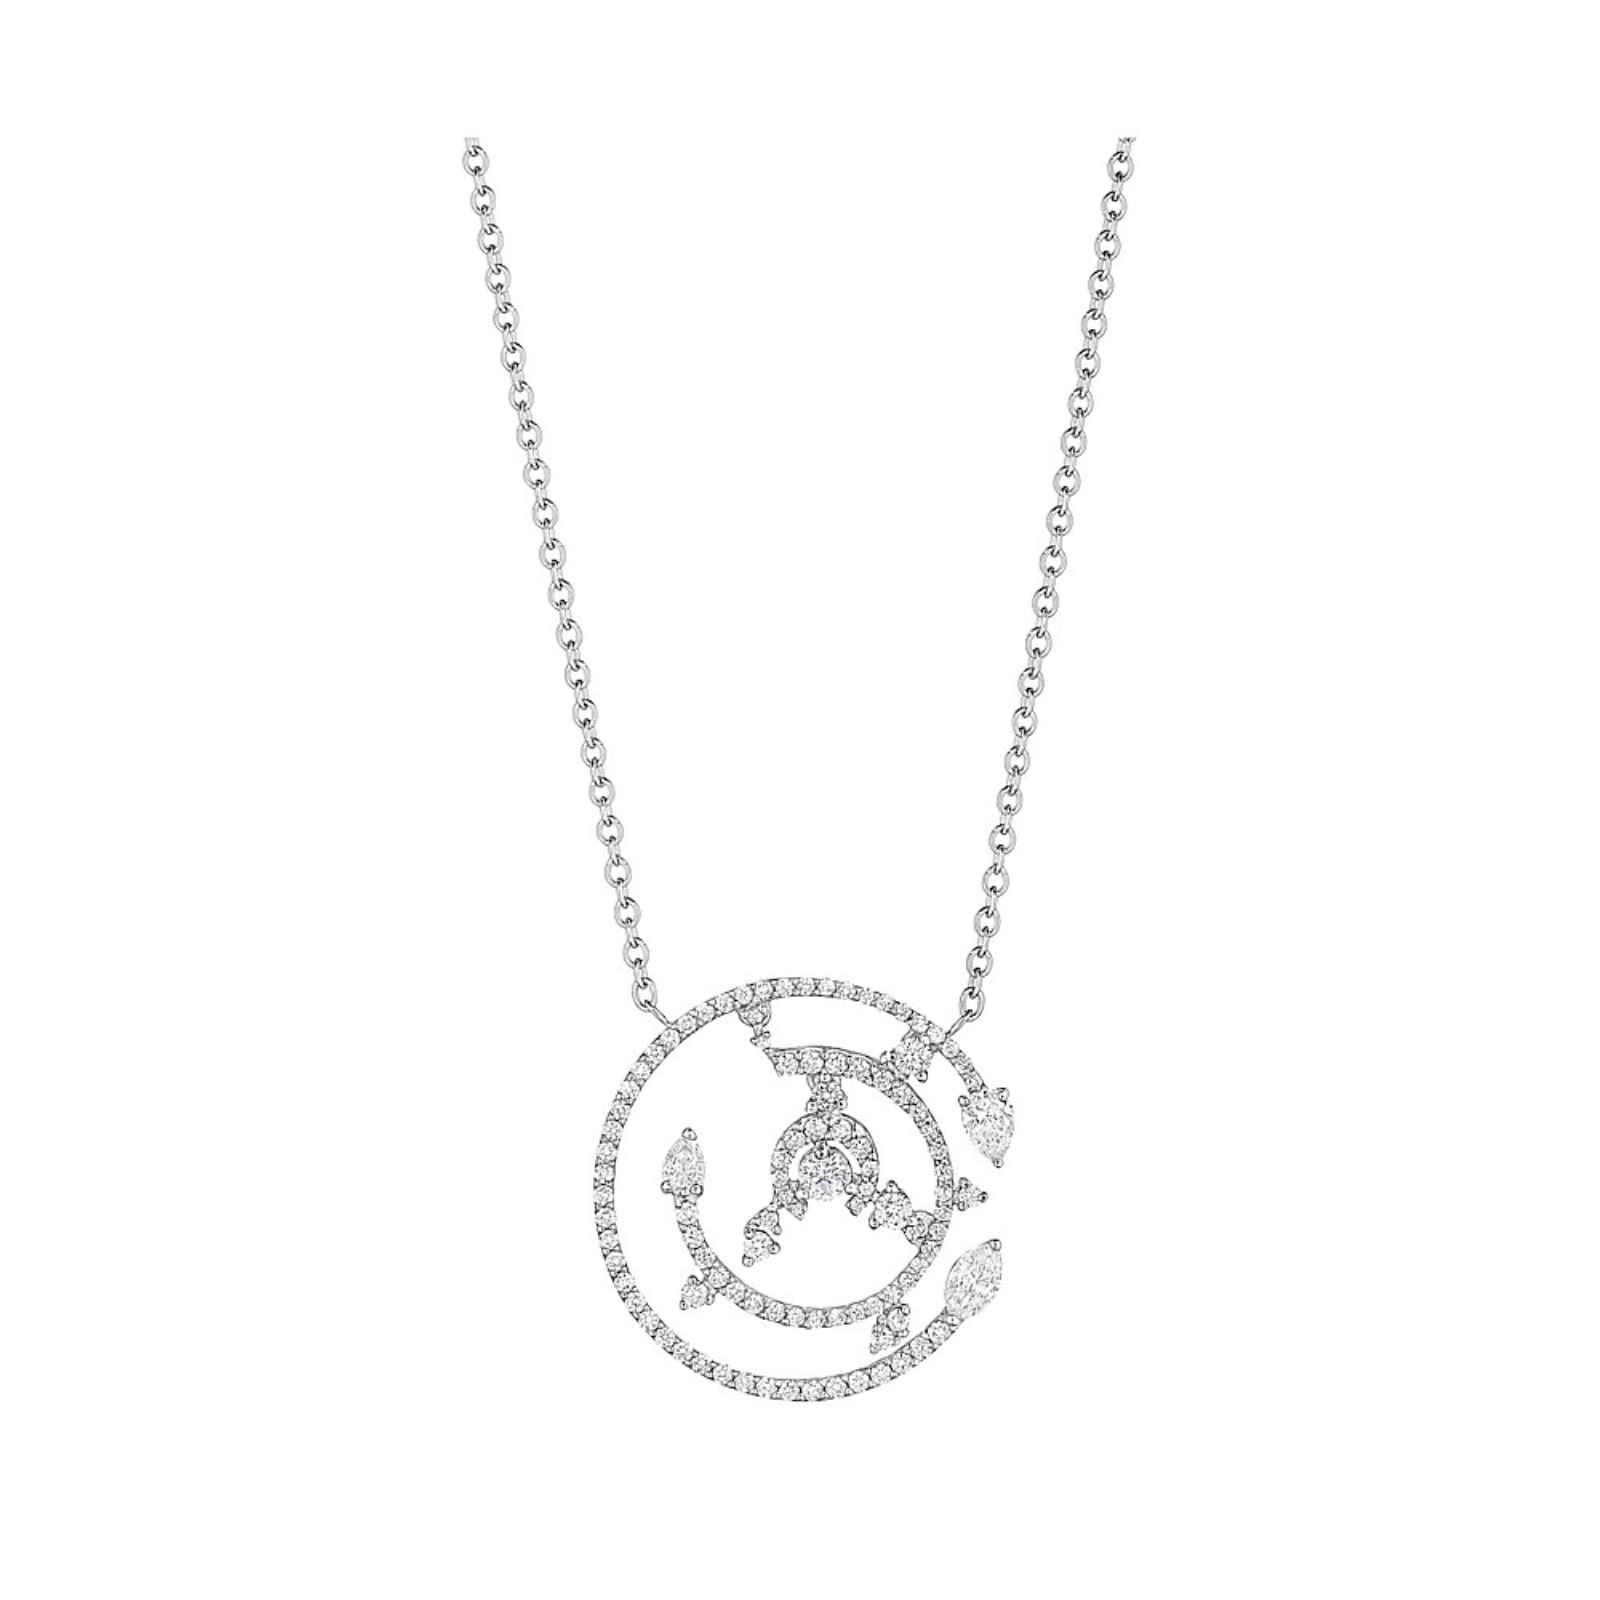 White Gold and Diamond Constellation Necklace